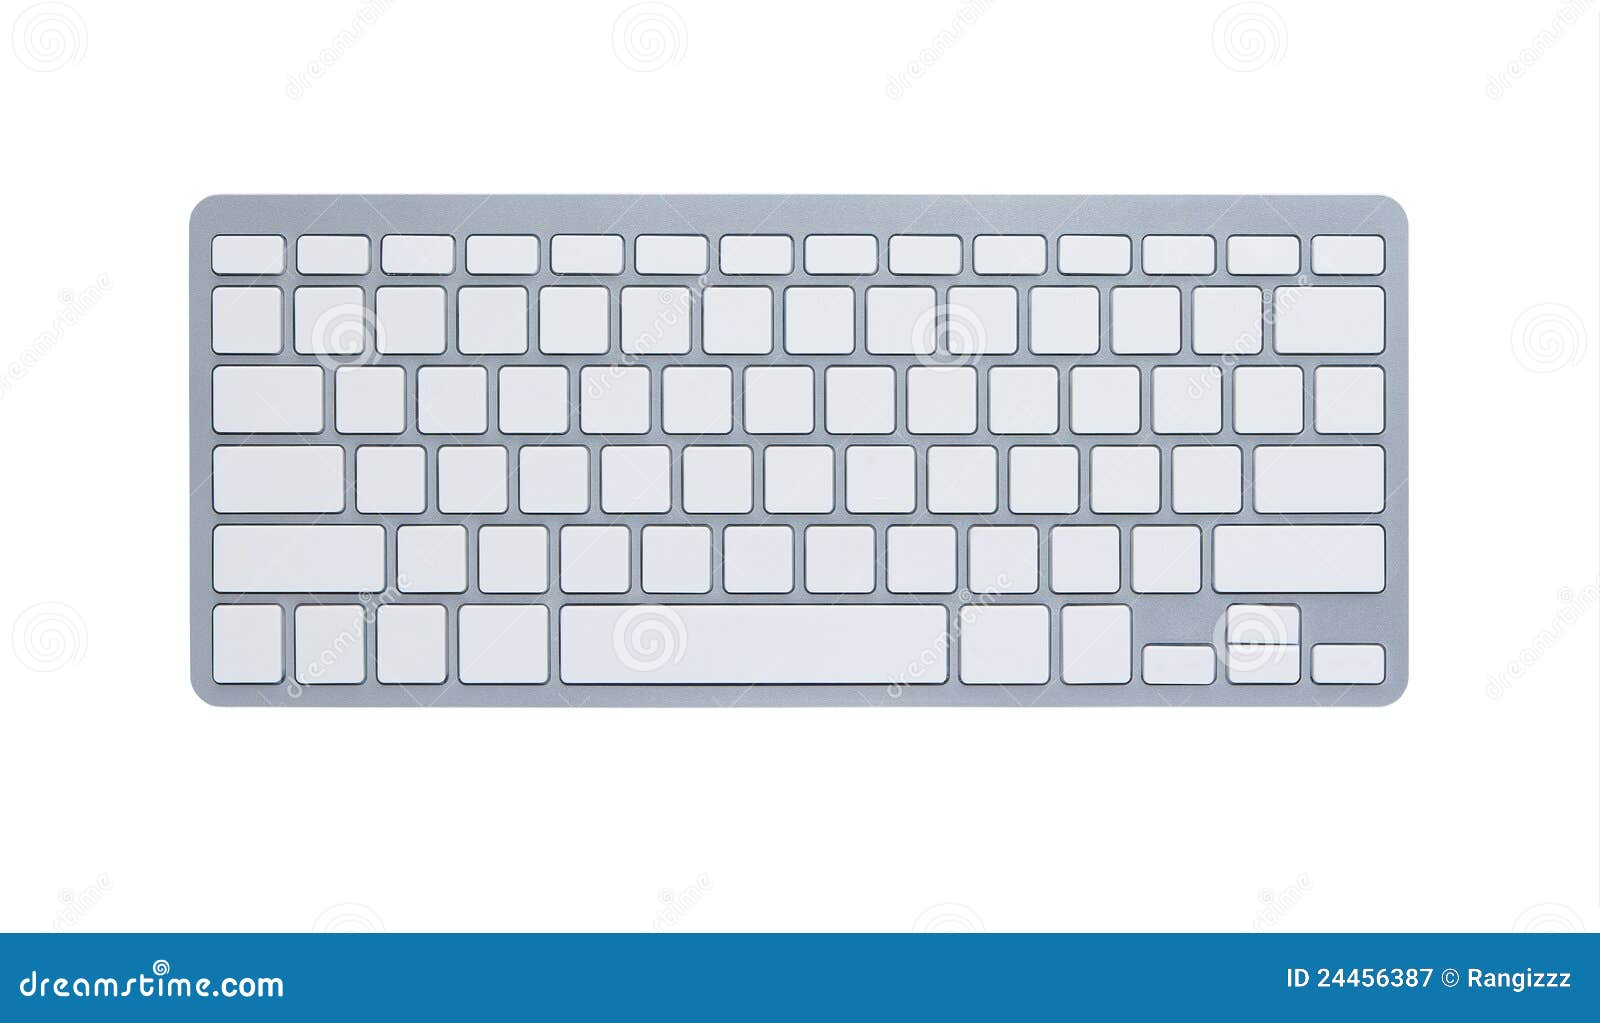 clipart of keyboard - photo #23